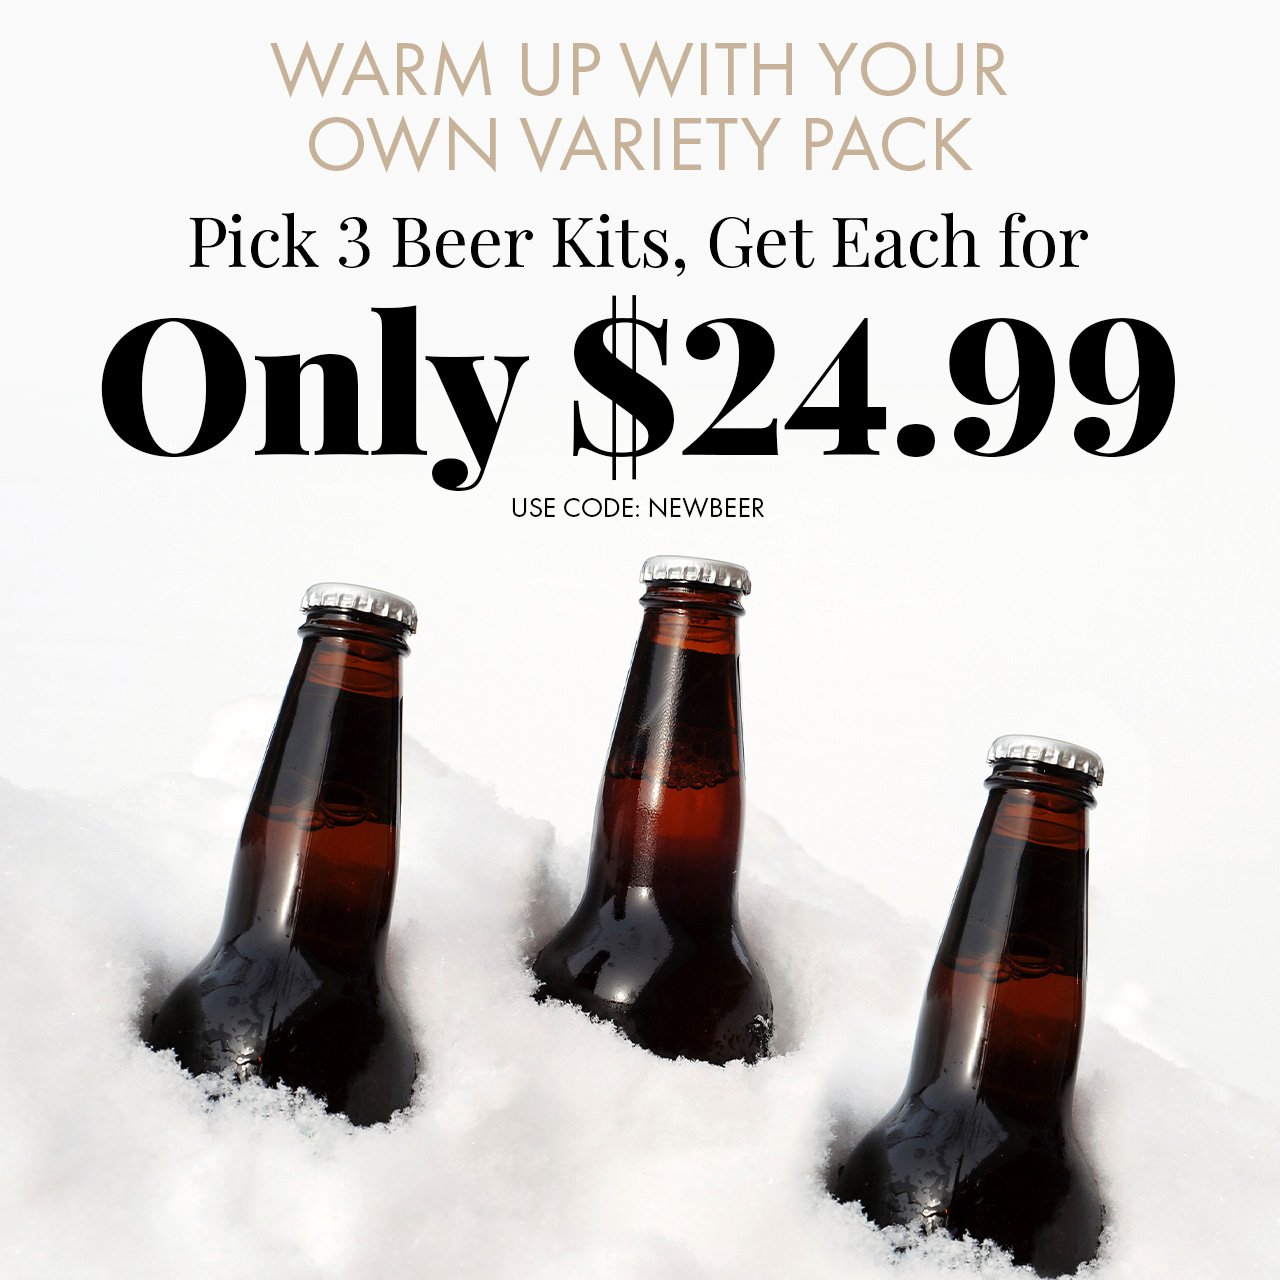 Warm Up with Your Own Variety Pack Pick 3 Beer Kits, Get Each for Only \\$24.99 Use Code: NEWBEER